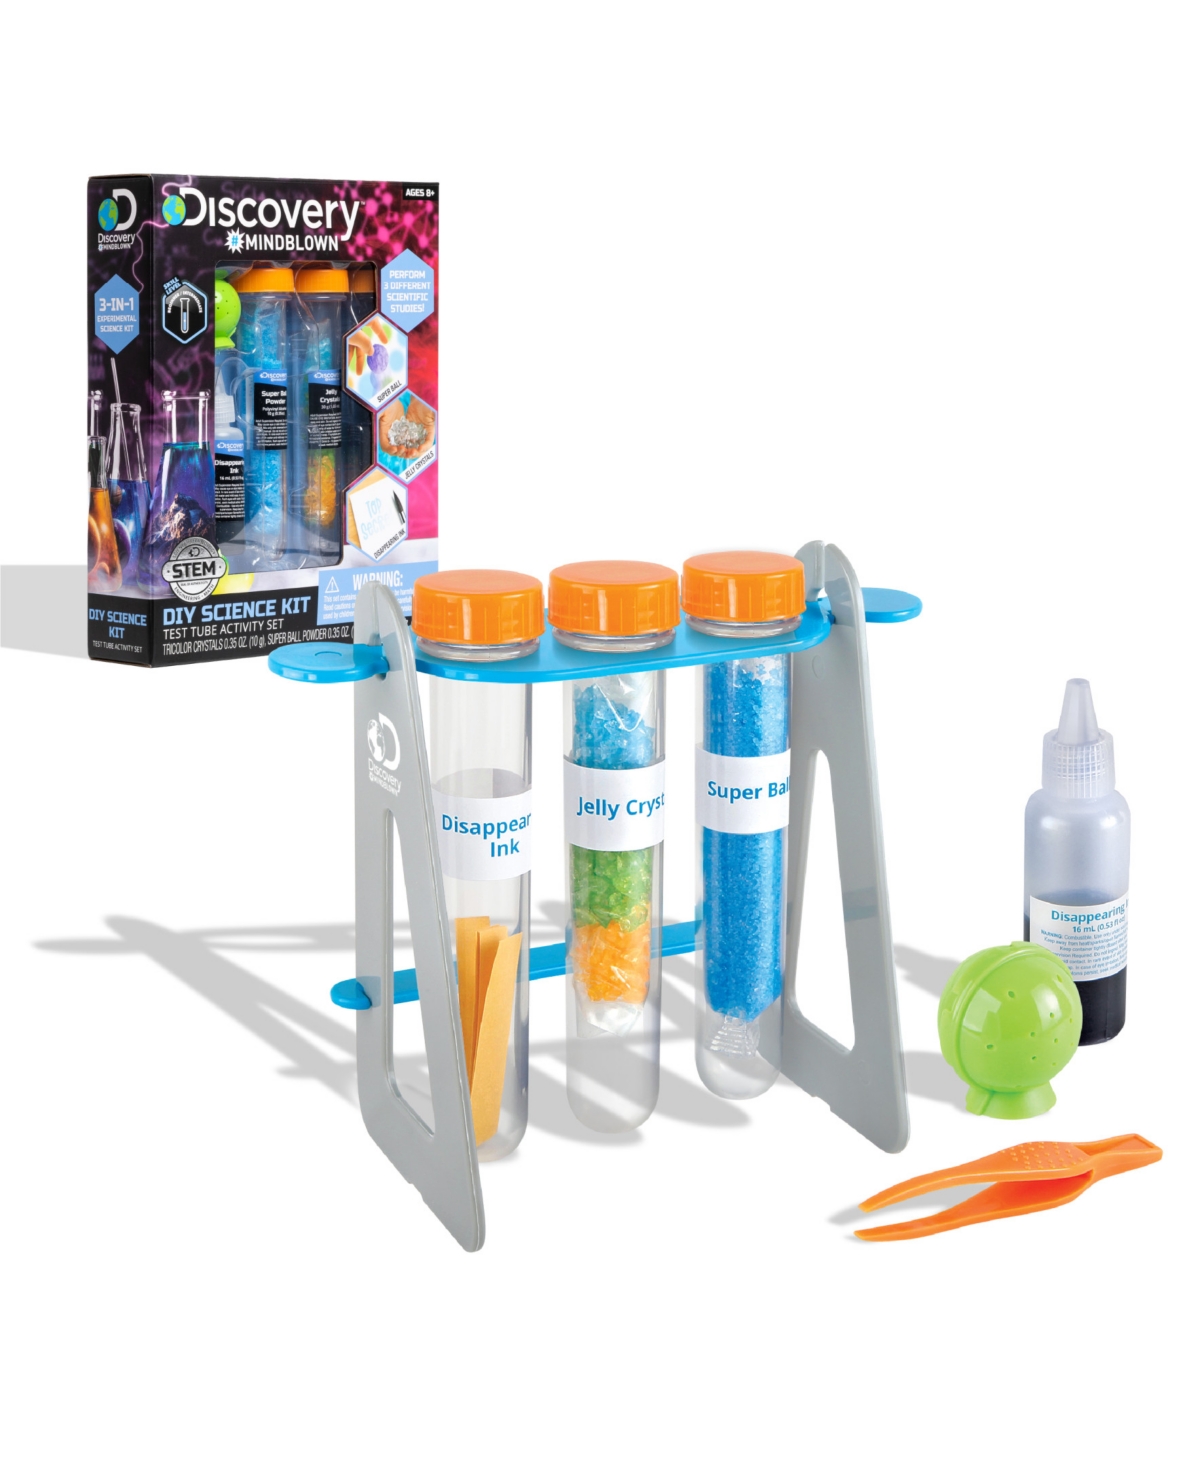 Discovery Mindblown Kids' Test Tubes Science Kit With 3 Educational Experiments Set, 14 Piece In Open Miscellaneous